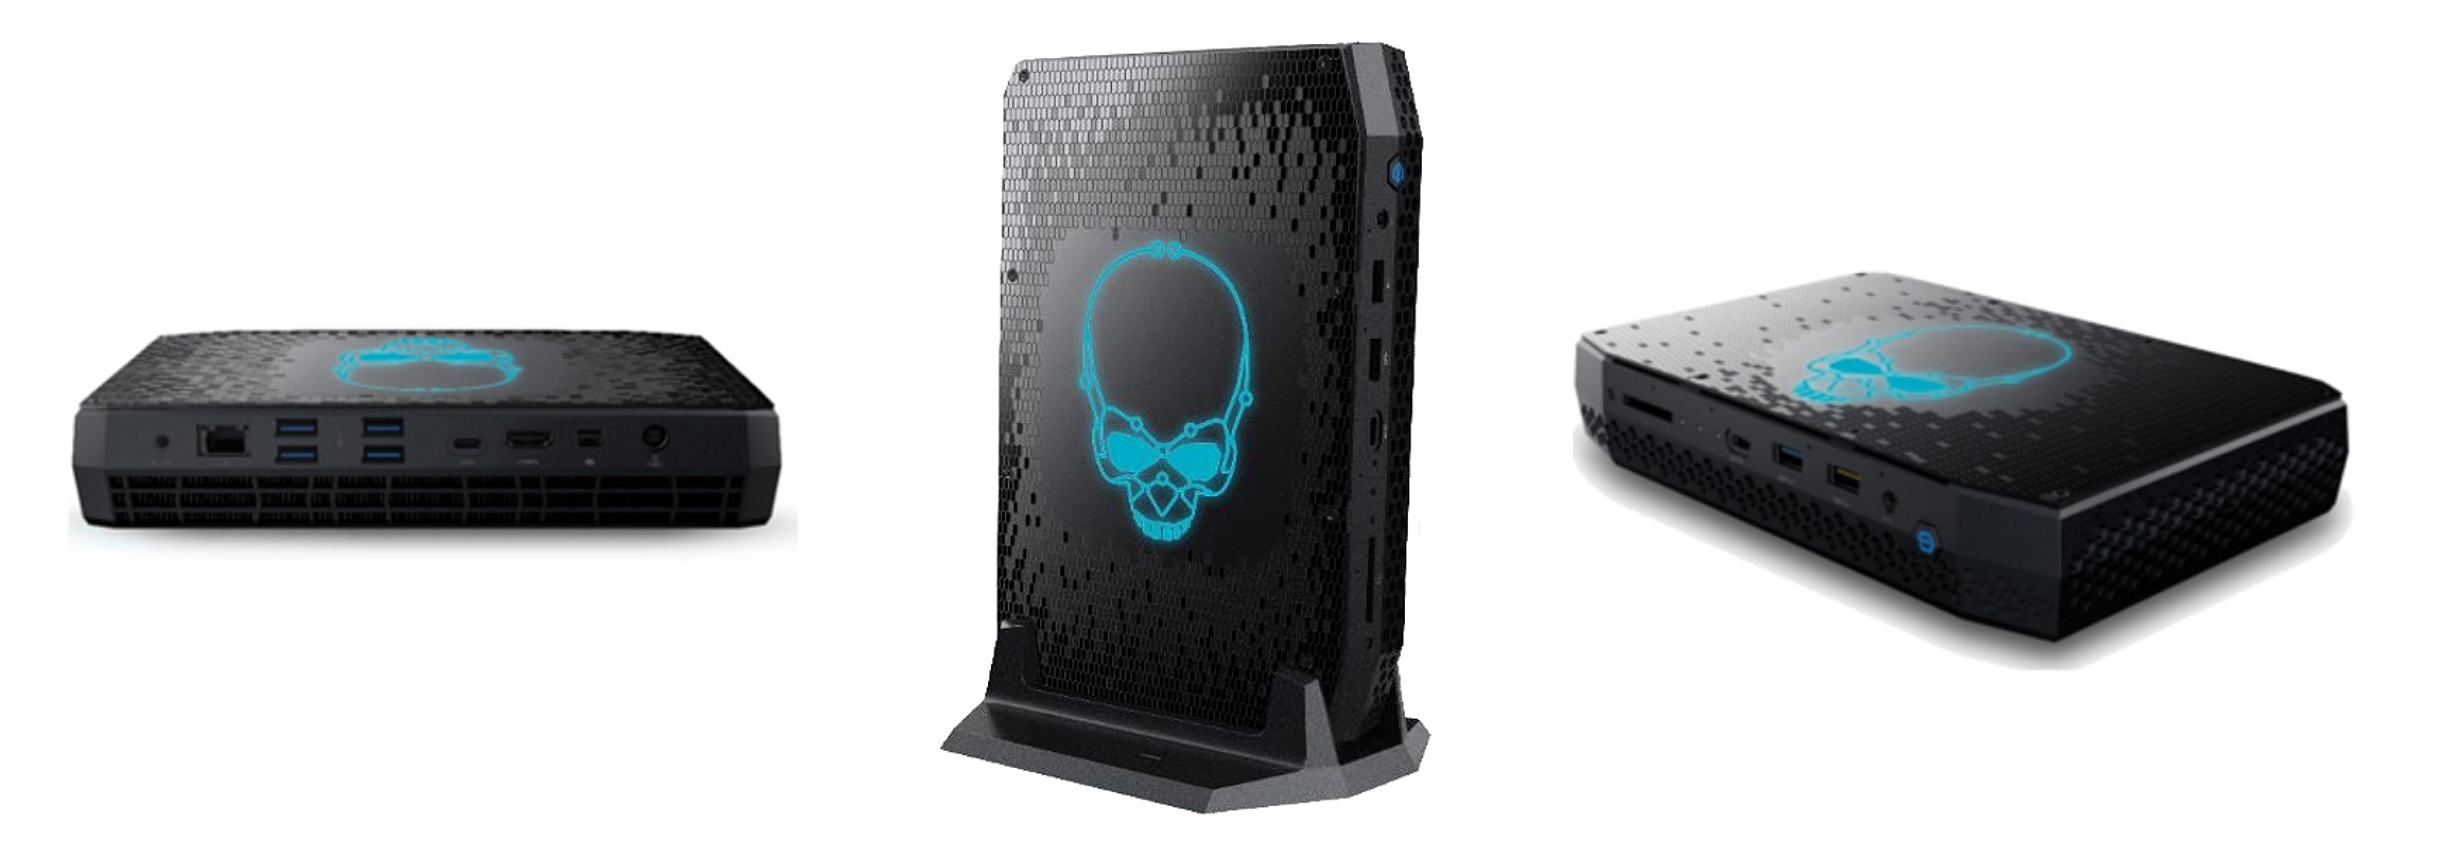 Intel gives the NUC 9 Performance a new lease of life as the NUC 